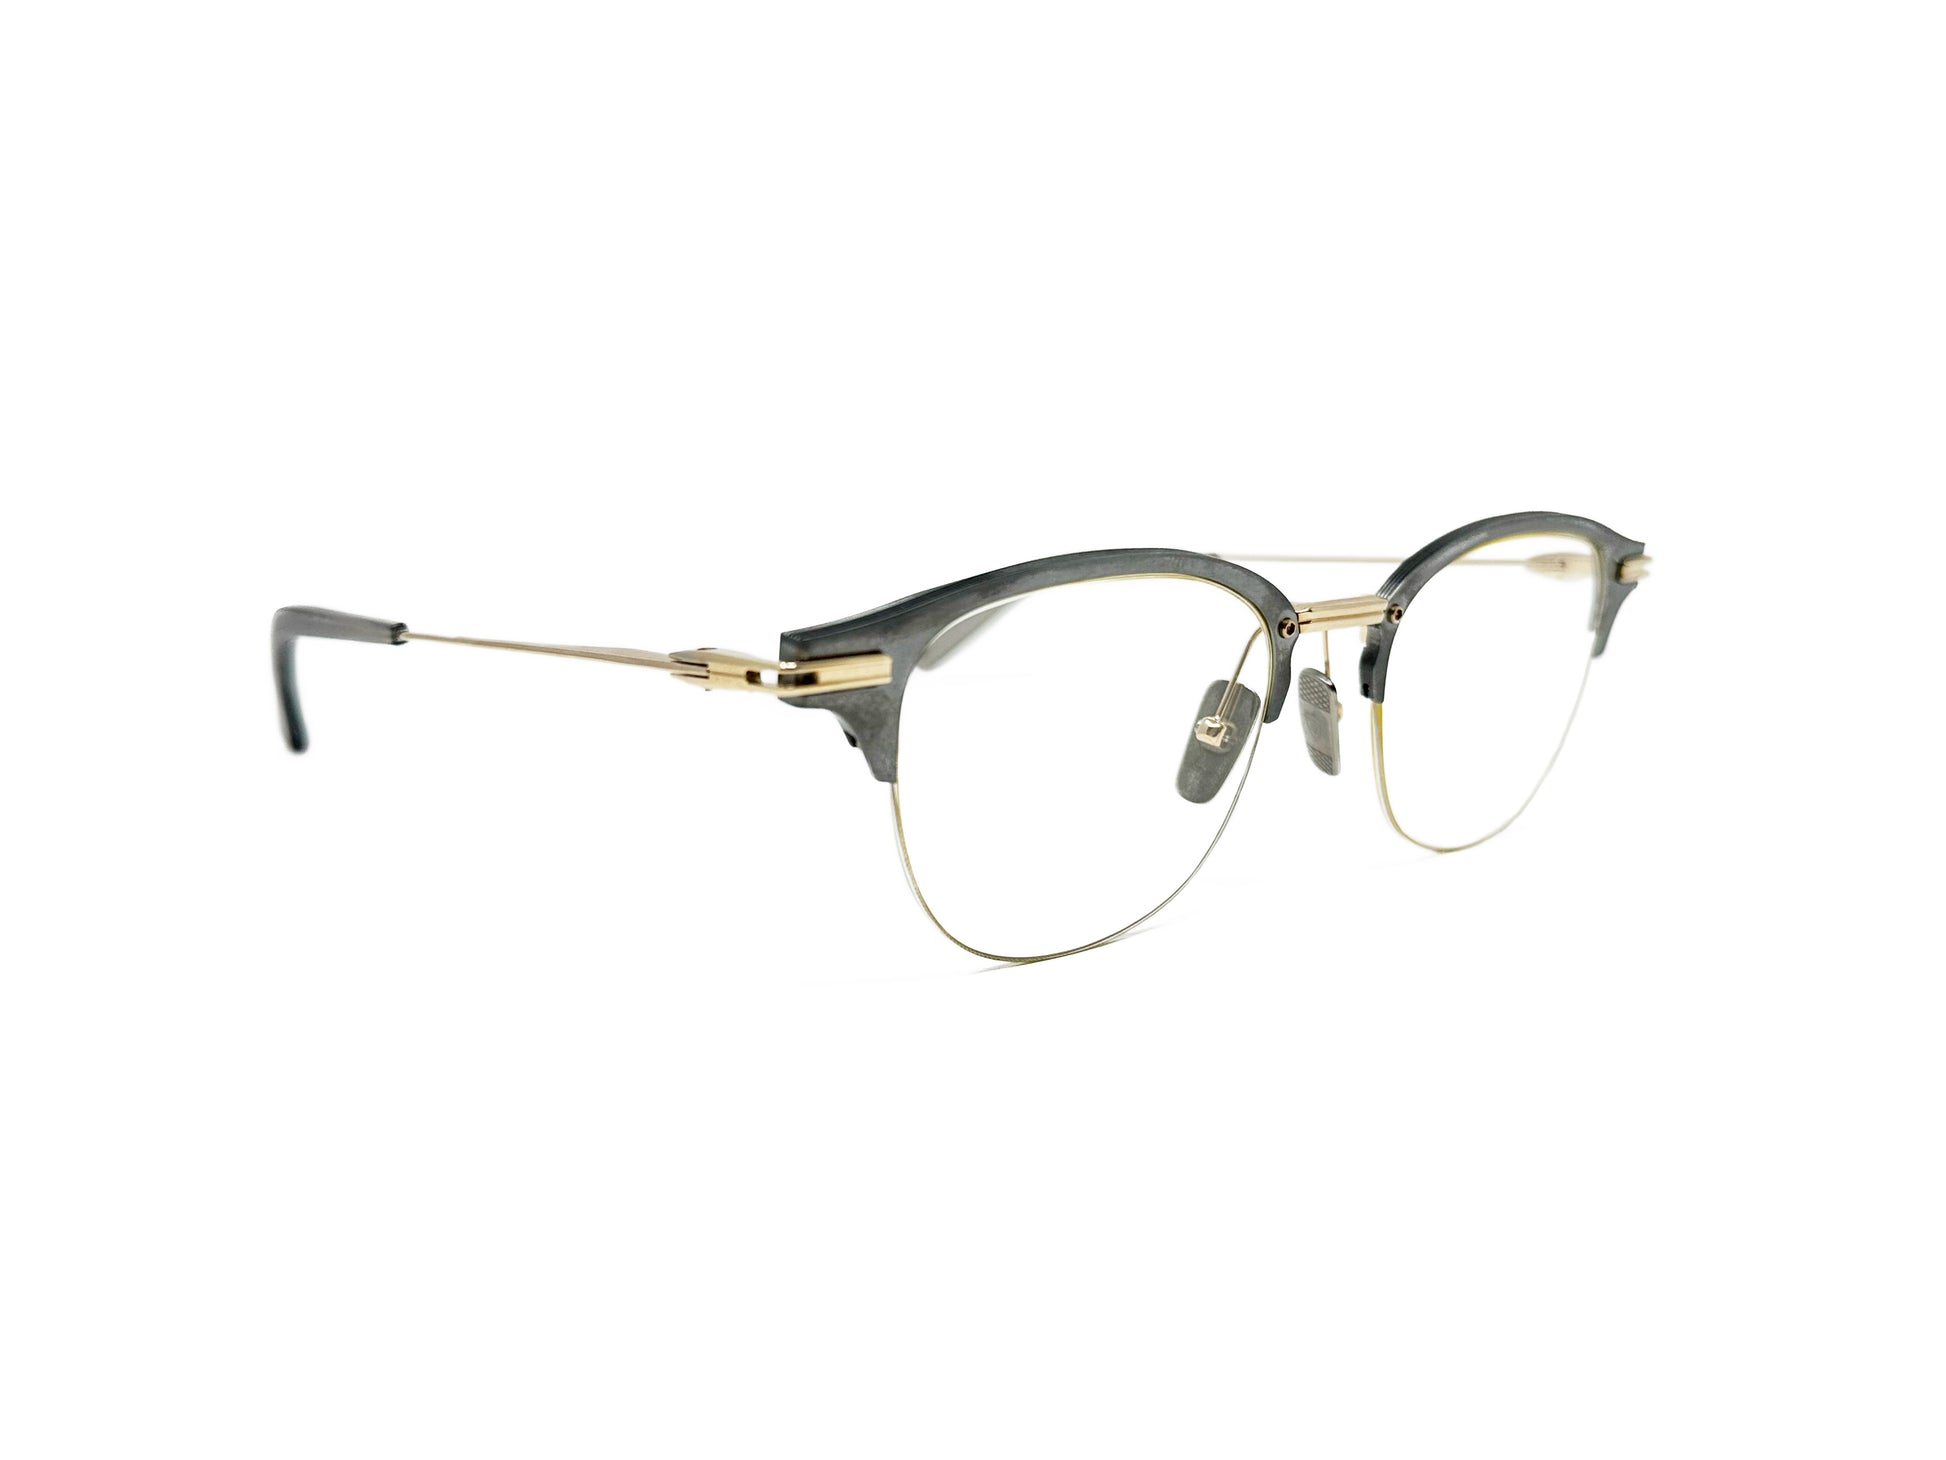 Dita Eyewear half-rim, clubmaster-style, metal, optical frame. Model: Iambic. Color: 02 - Antique Silver. Side view.